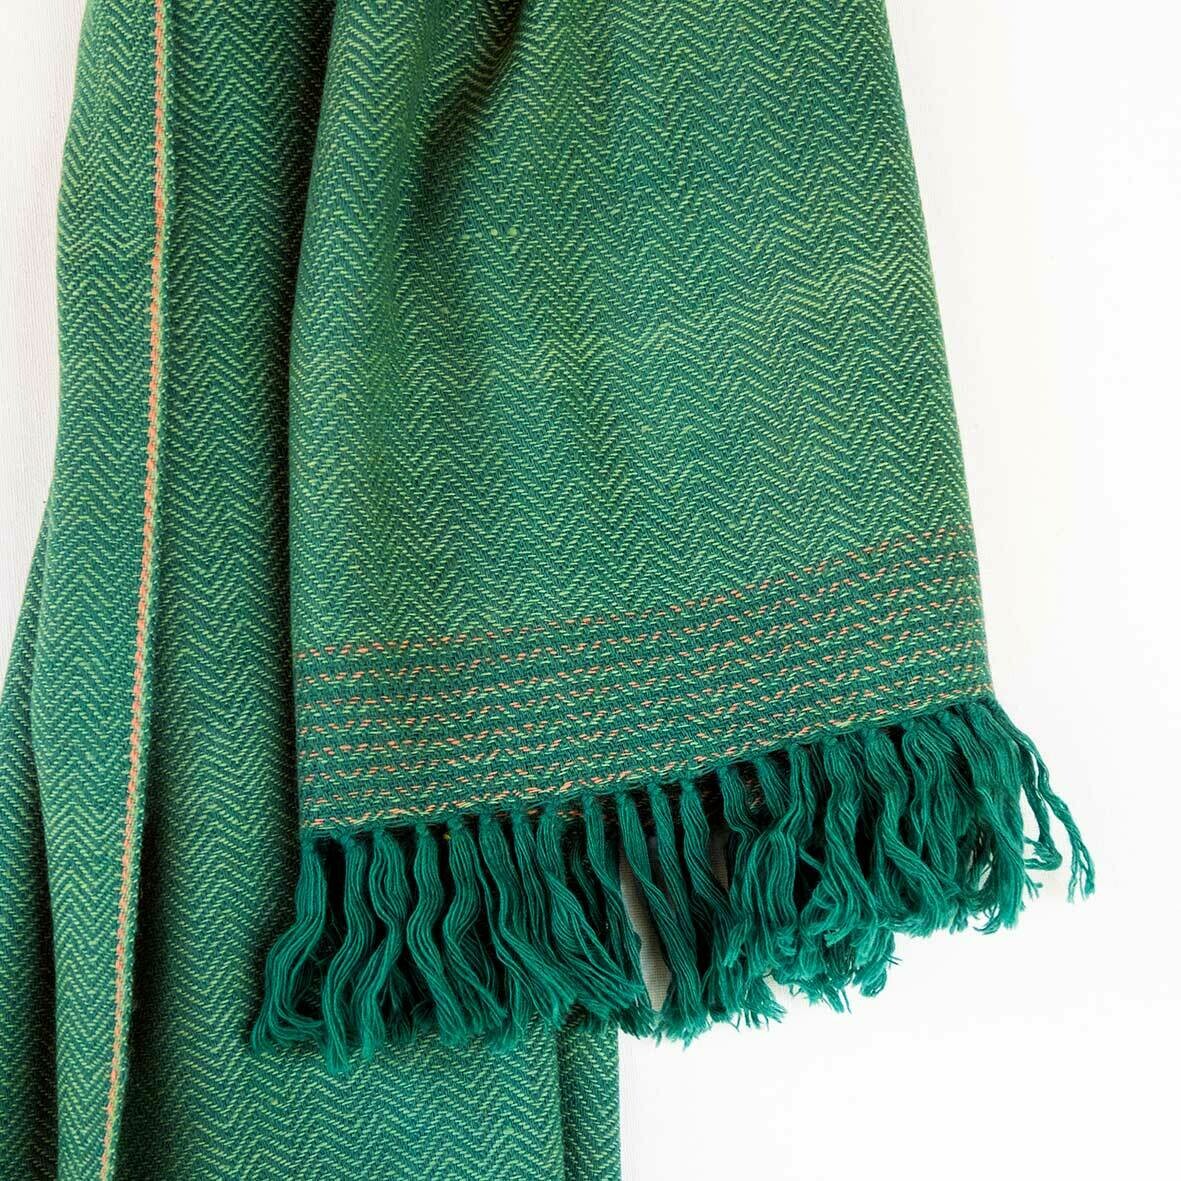 Hand-woven woollen shawl dyed with indigo, shellac and tesu